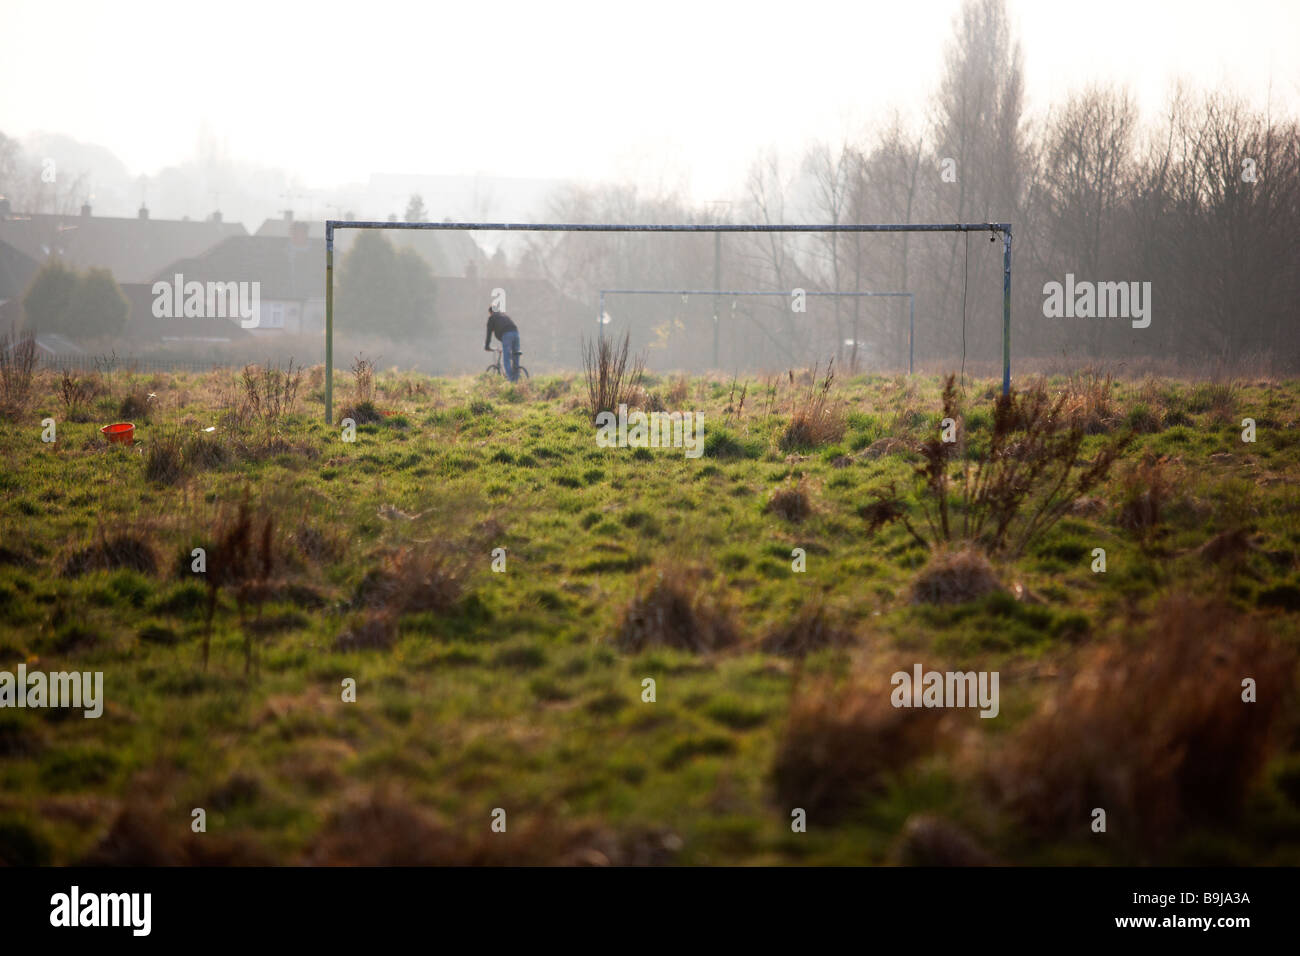 A football pitch, now overgrown and abandoned, on the outskirts of Coventry, UK Stock Photo